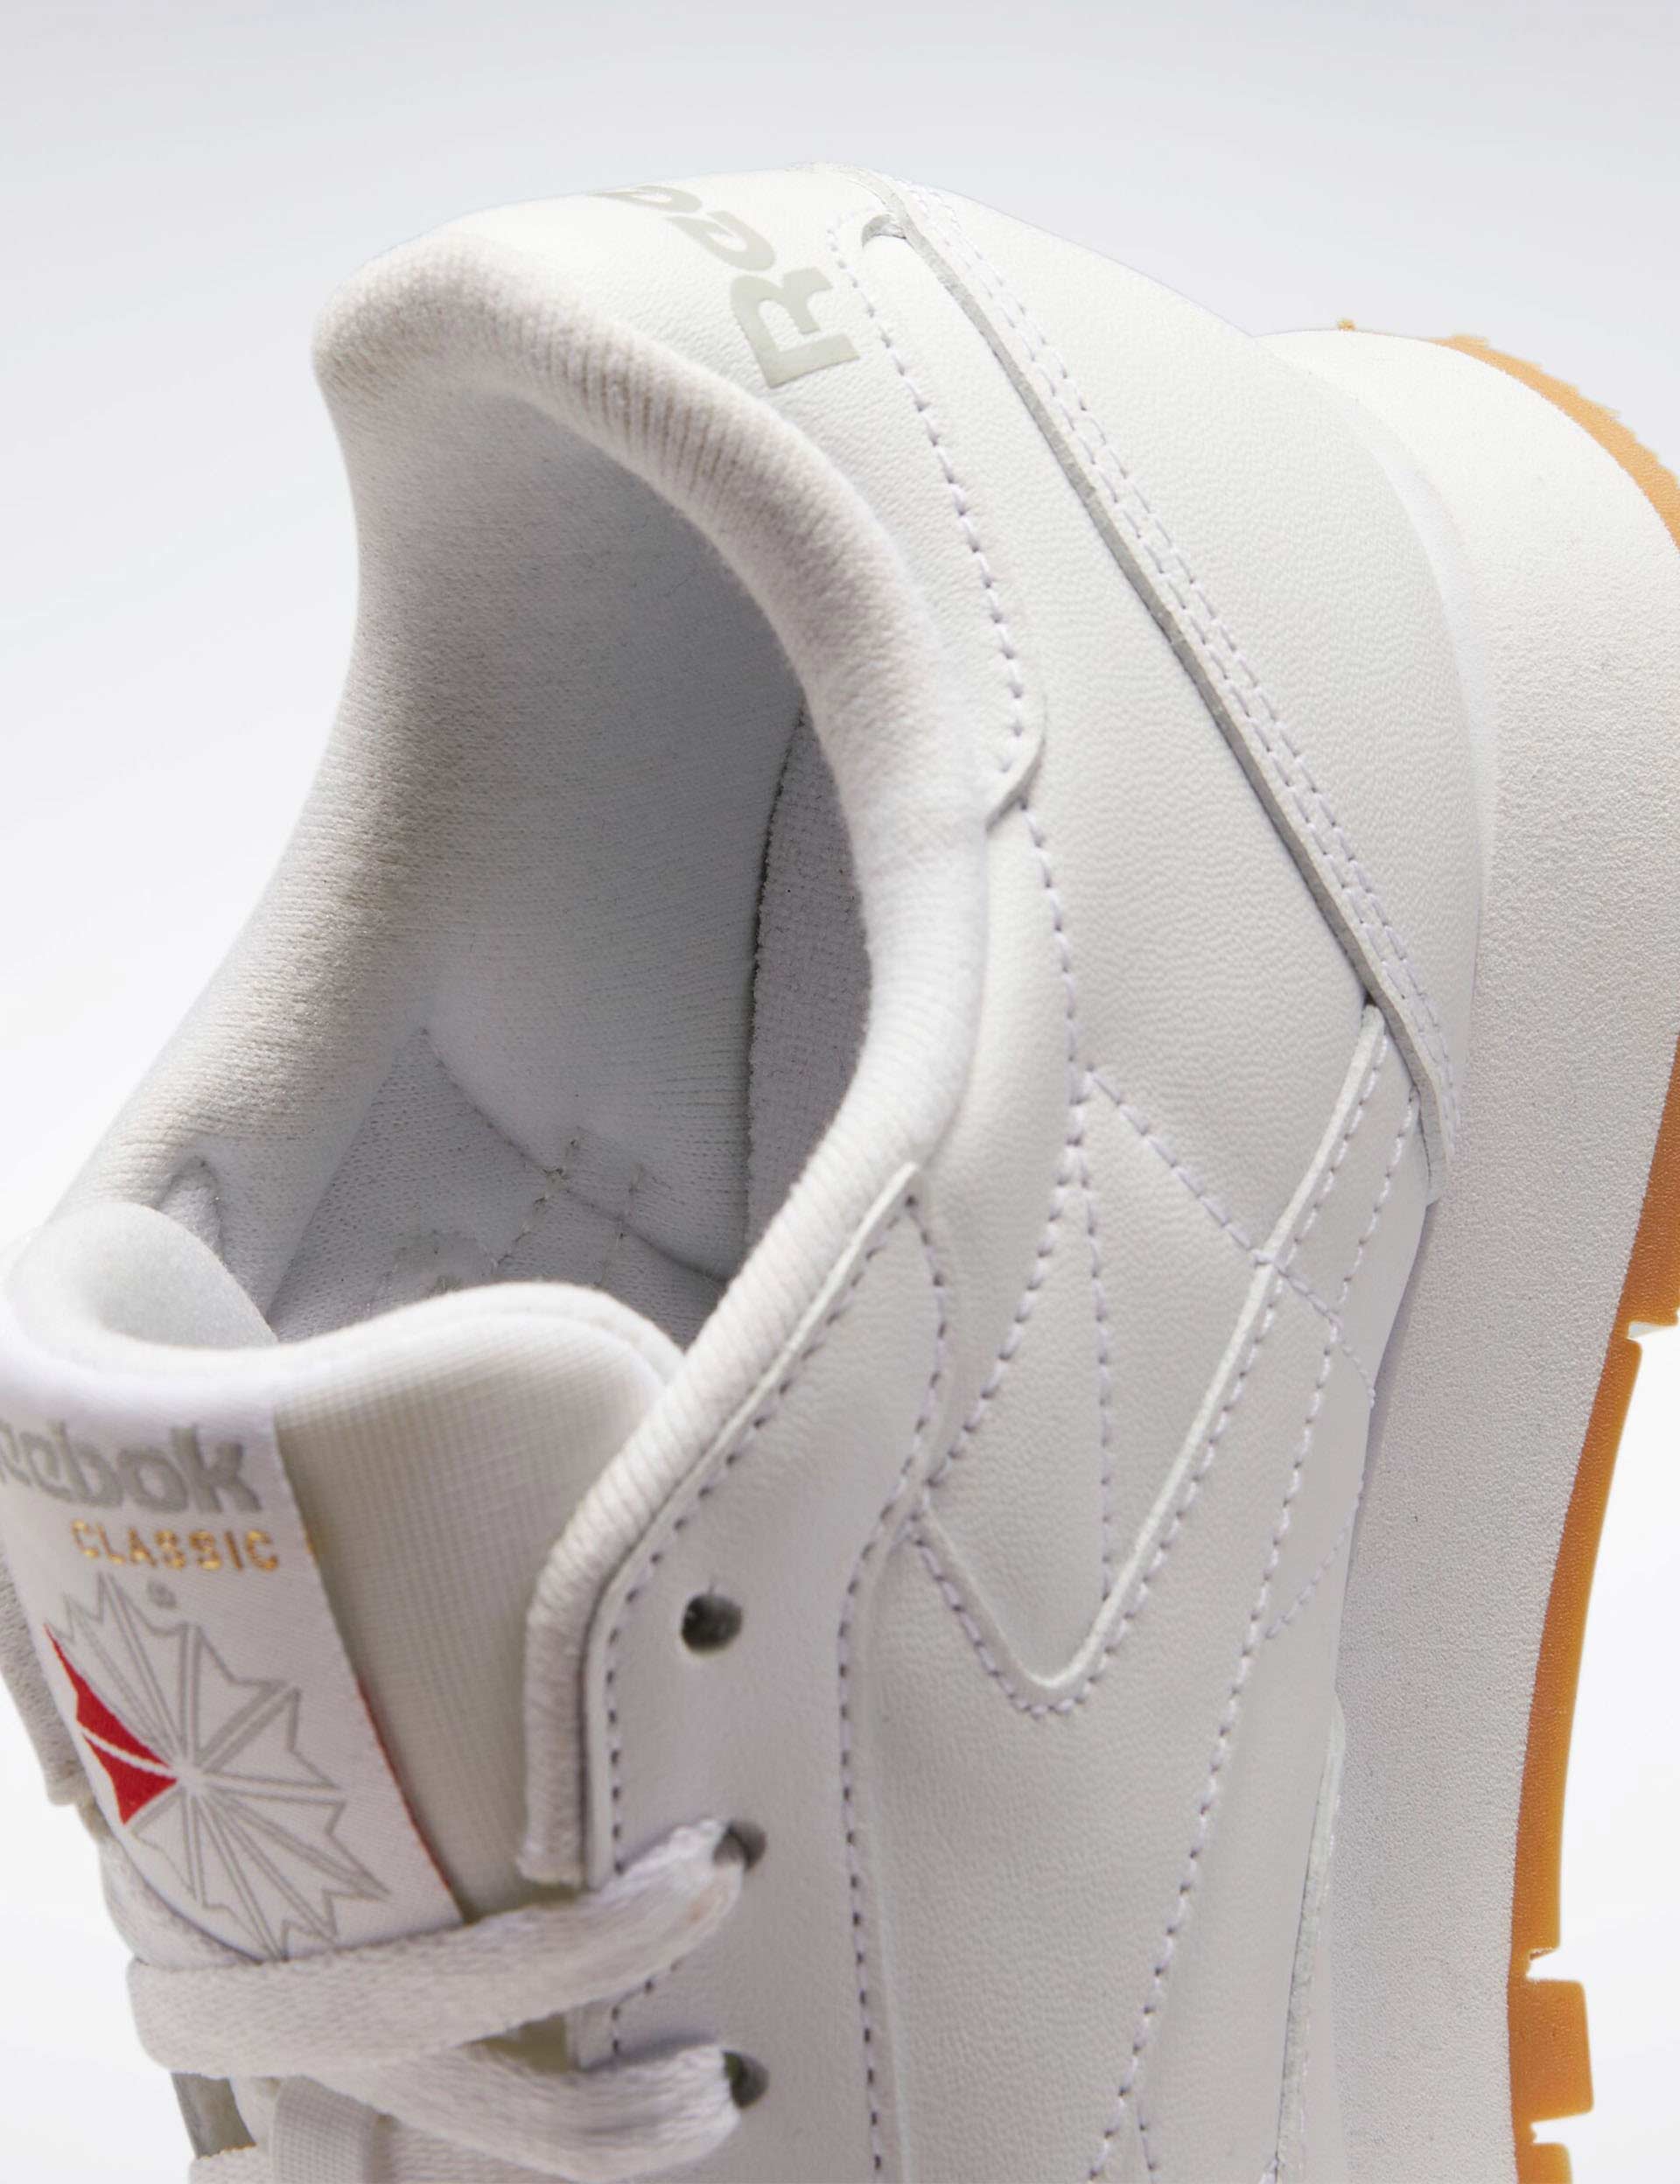 Reebok Classic Leather Trainers White/Gum